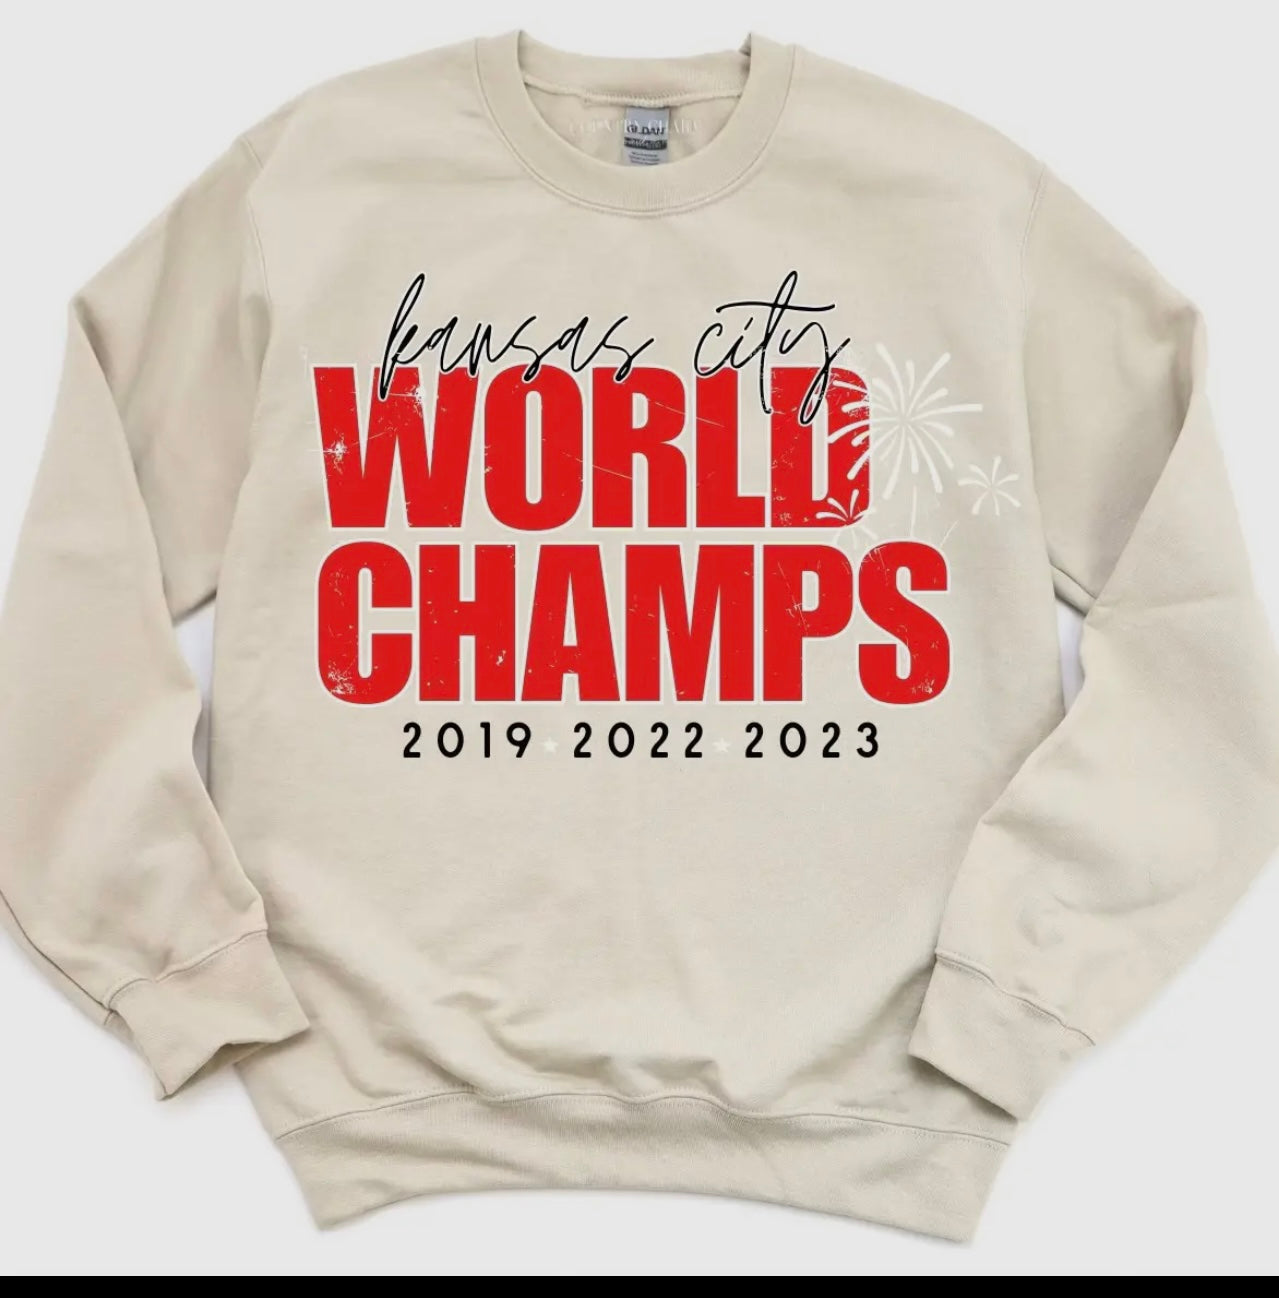 World champs-PREORDER